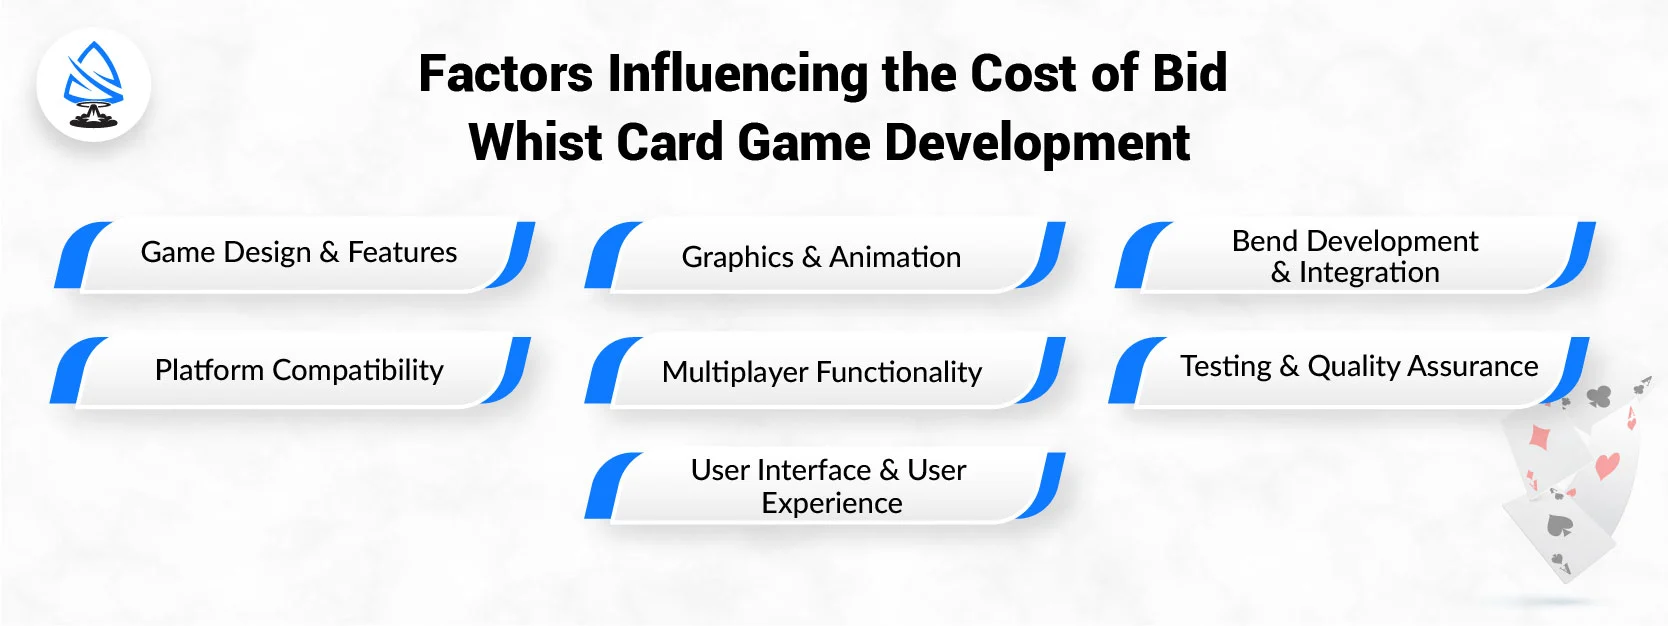 Factors Influencing the Cost of Bid Whist Card Game Development